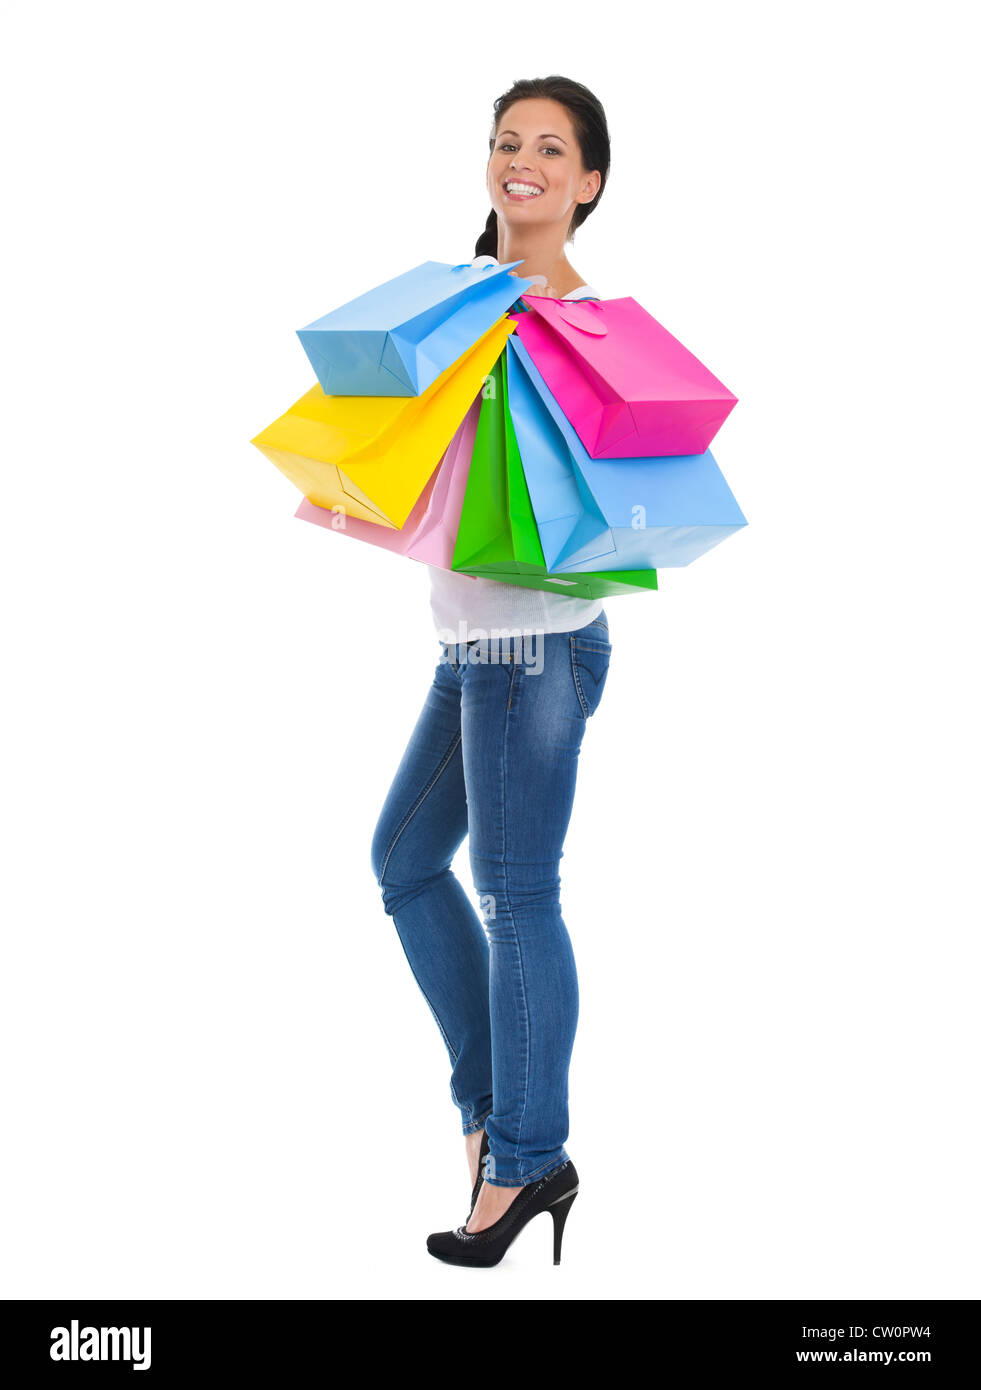 Full length portrait of happy girl with shopping bags Stock Photo